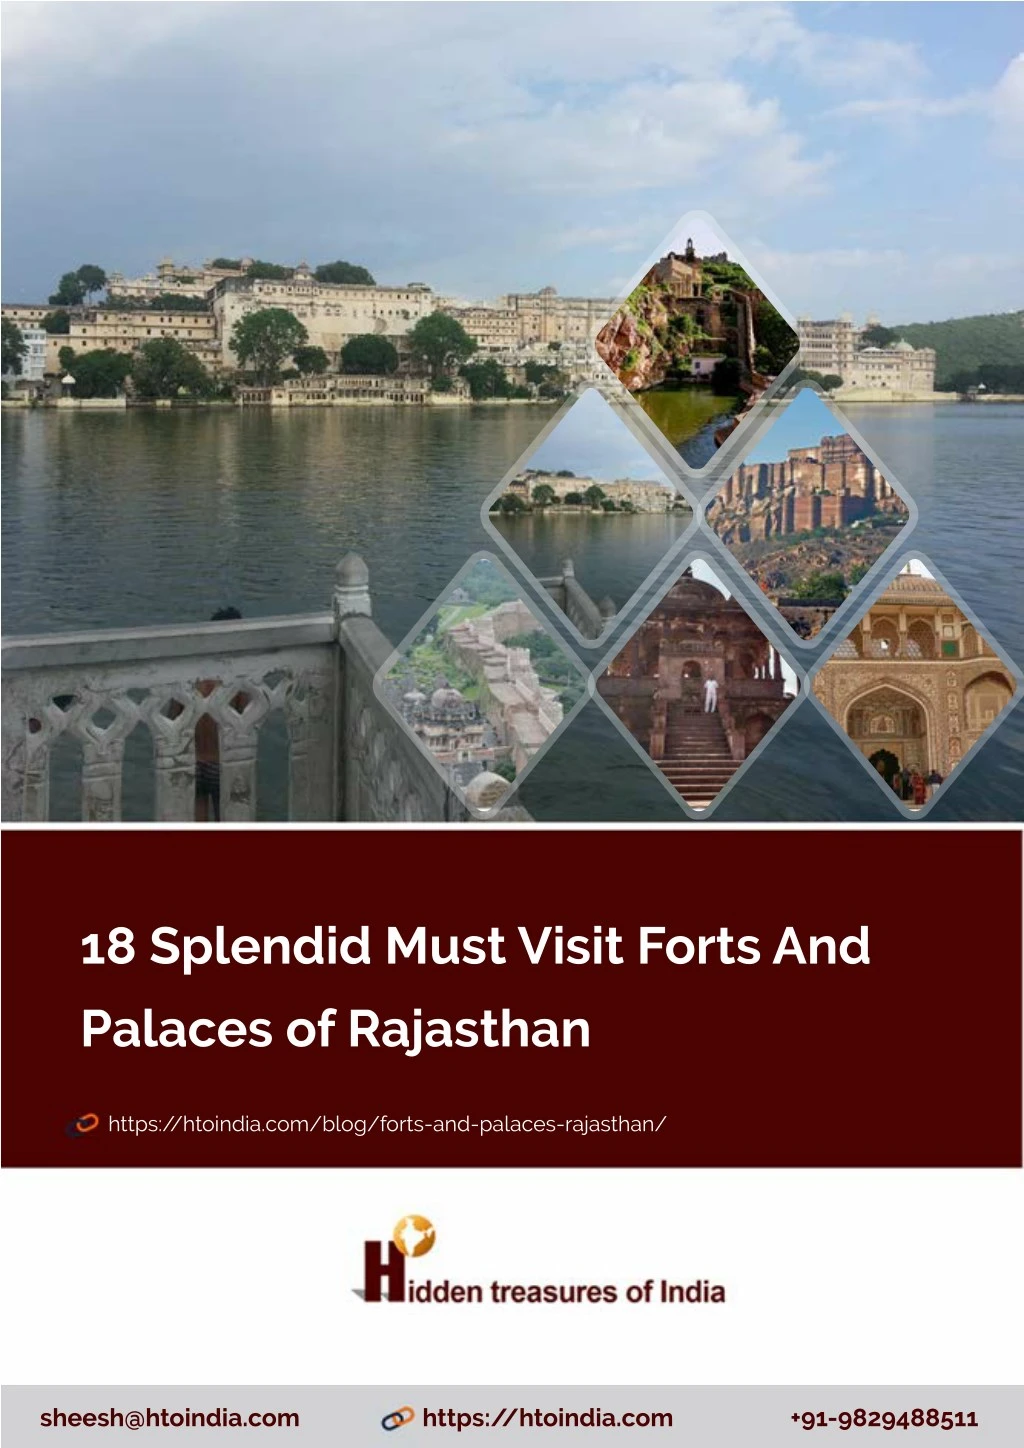 18 splendid must visit forts and palaces